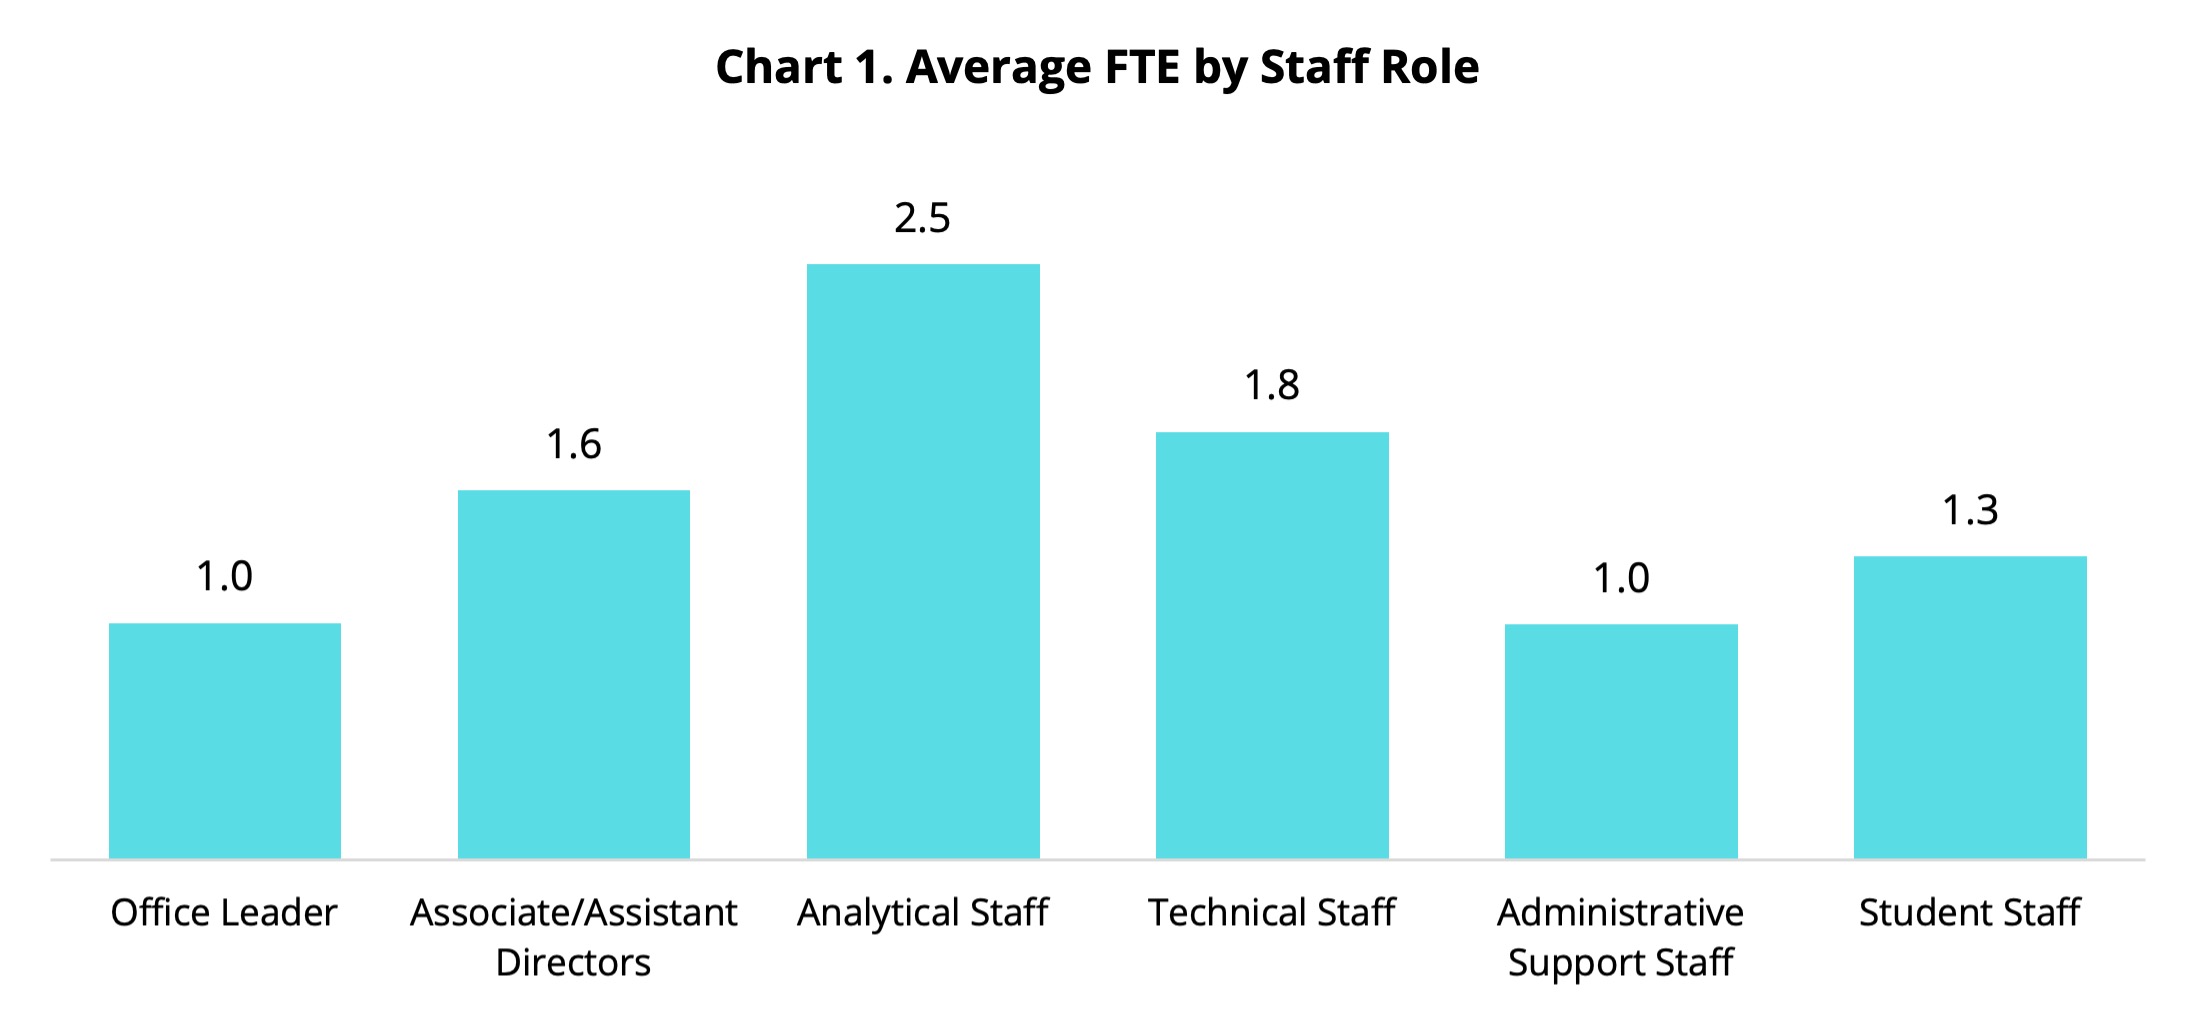 Chart 1. Average FTE by Staff Role 